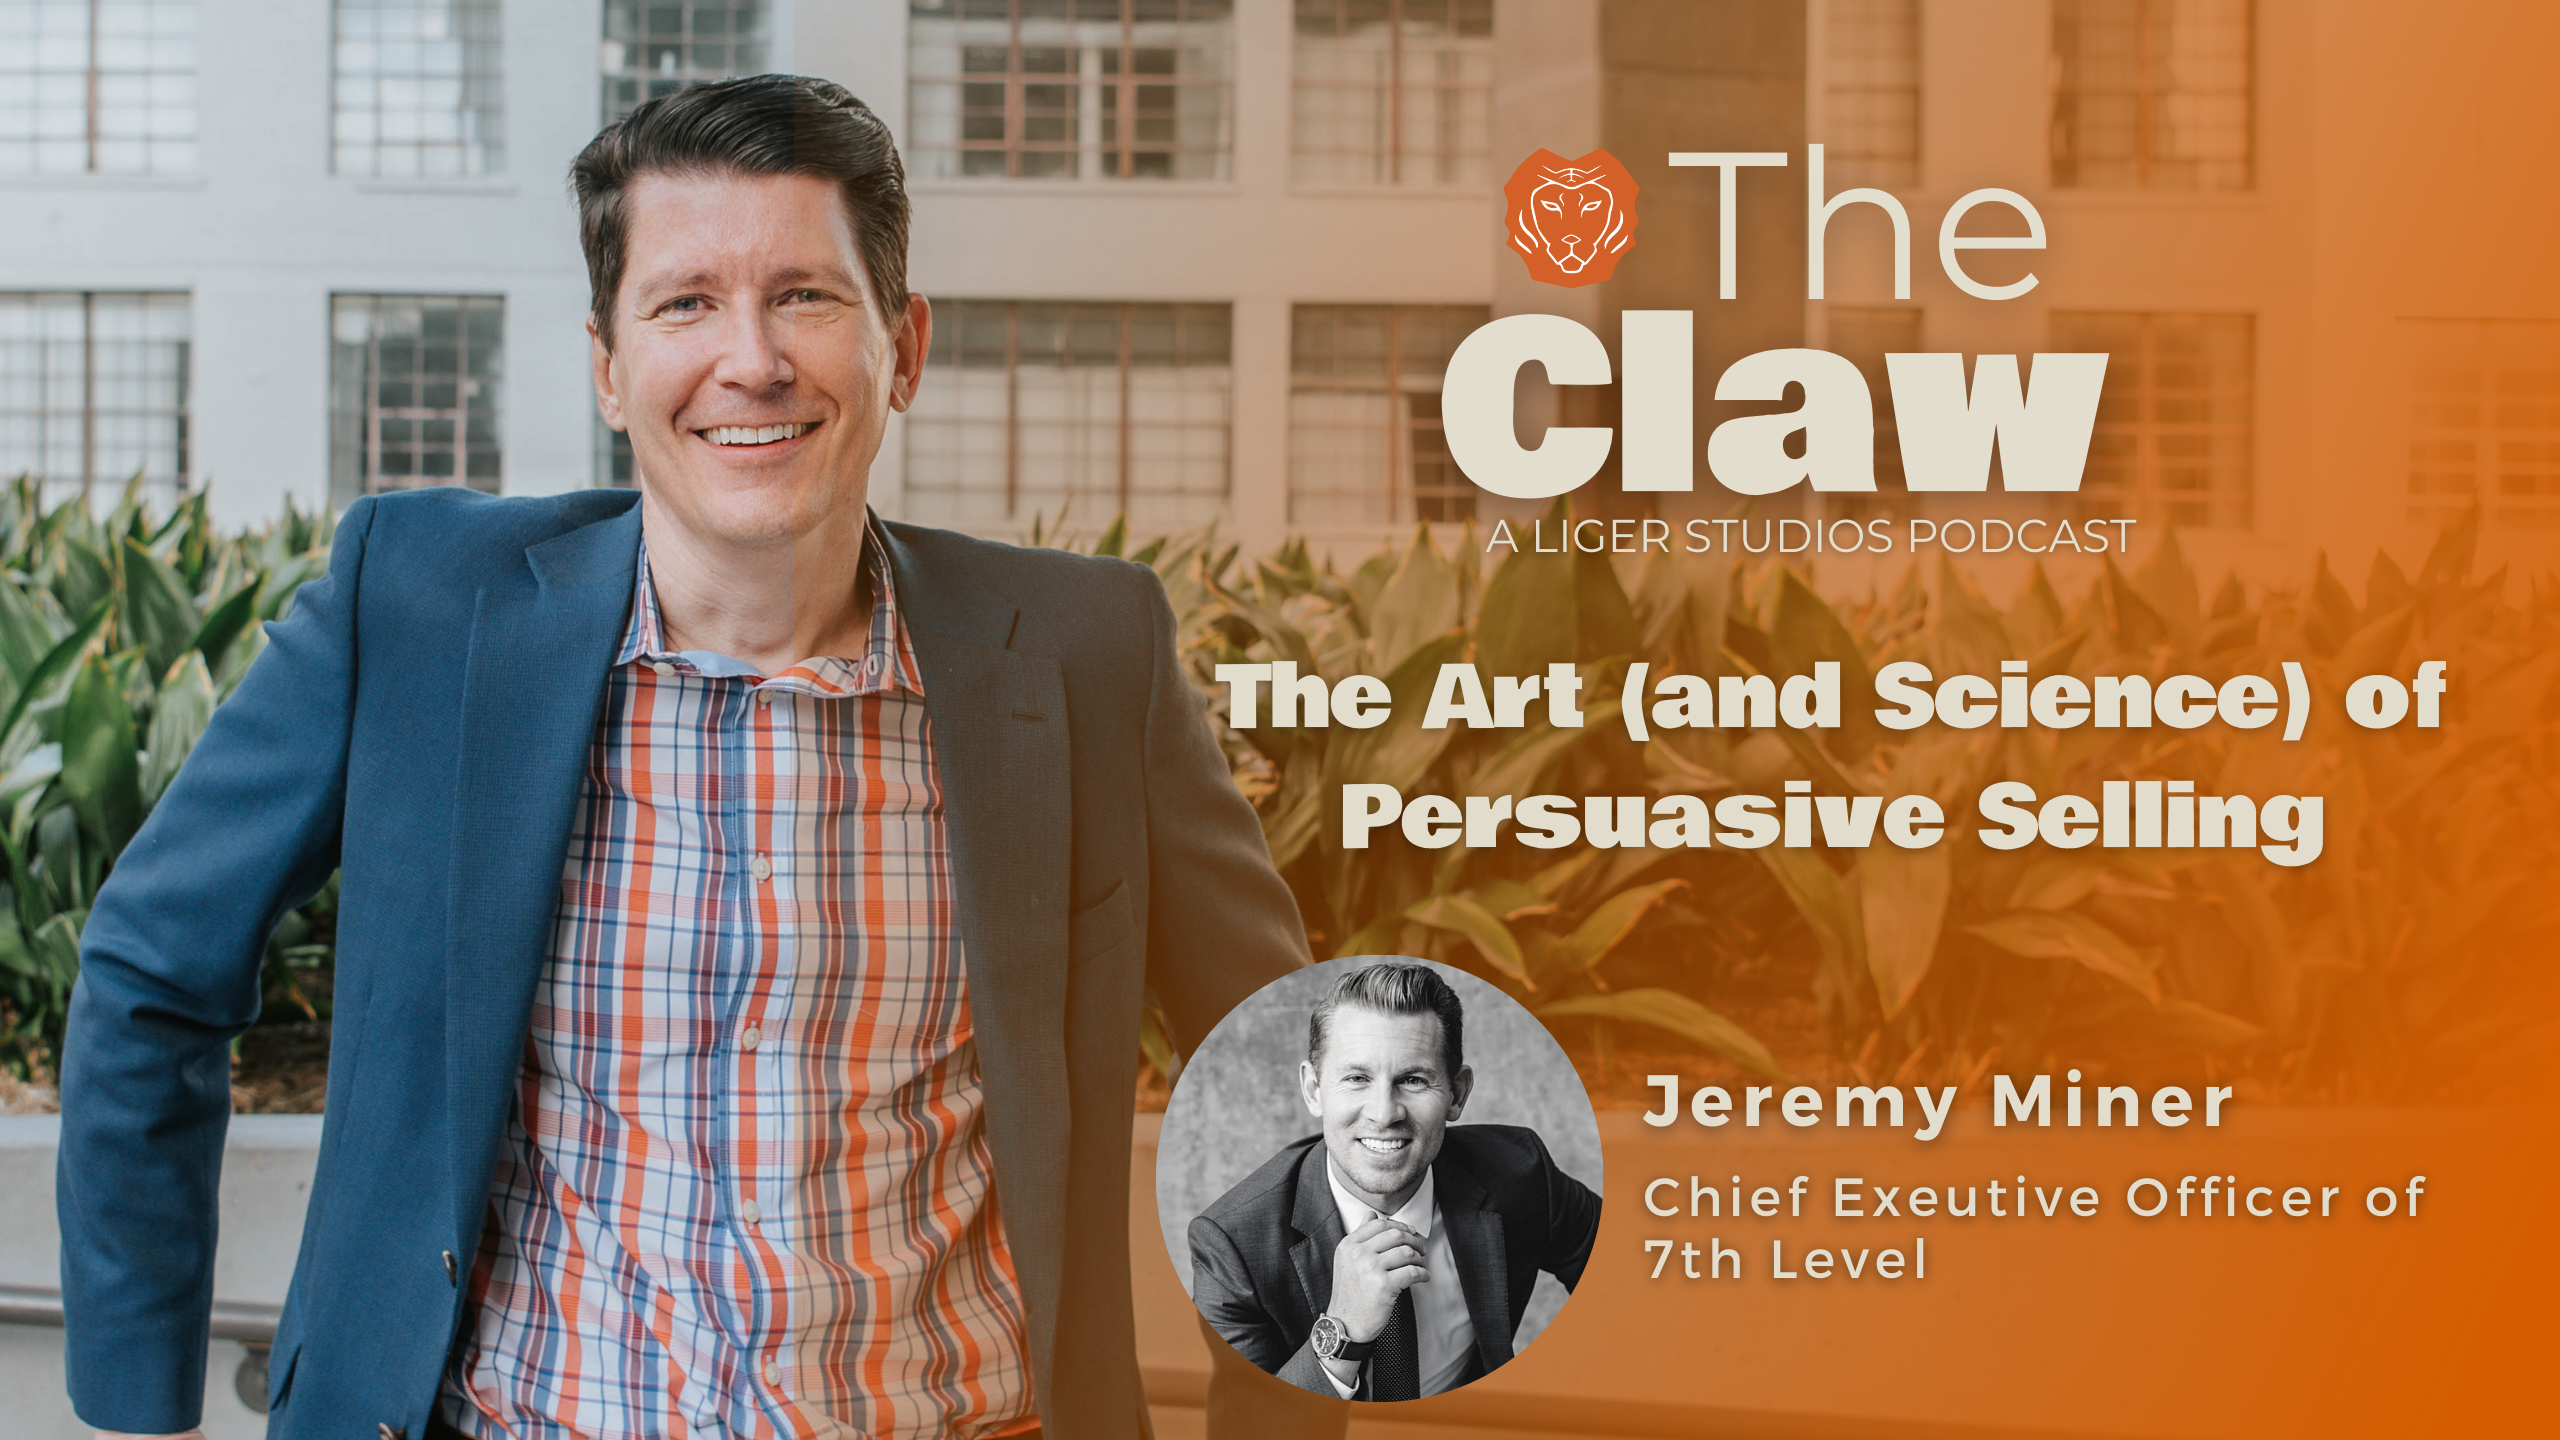 The Claw Podcast: The Art & Science of Persuasive Selling with Jeremy Miner